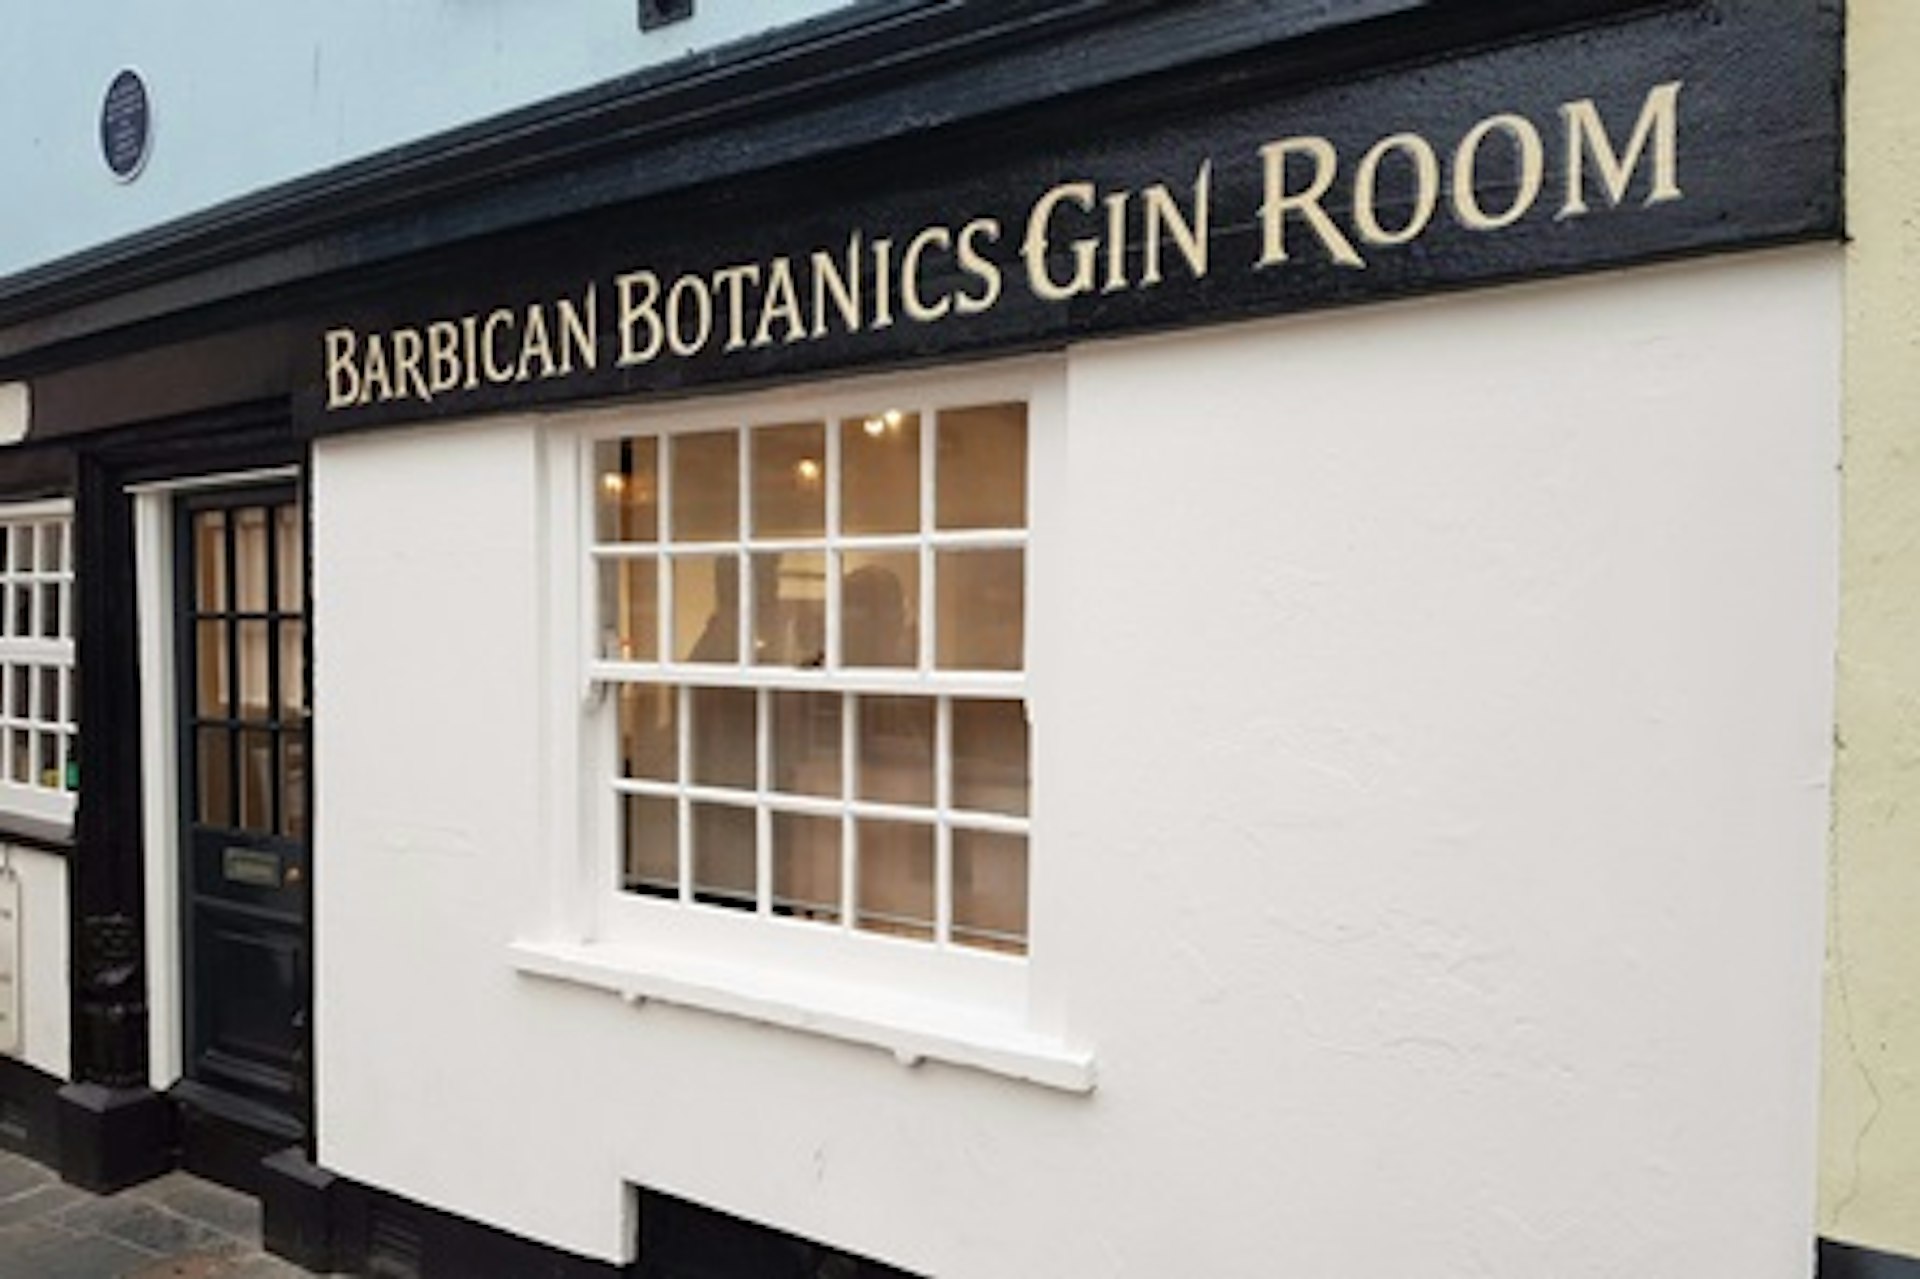 Make Your Own Artisan Gin with Tastings for Two at the Barbican Botanics Gin Room 4